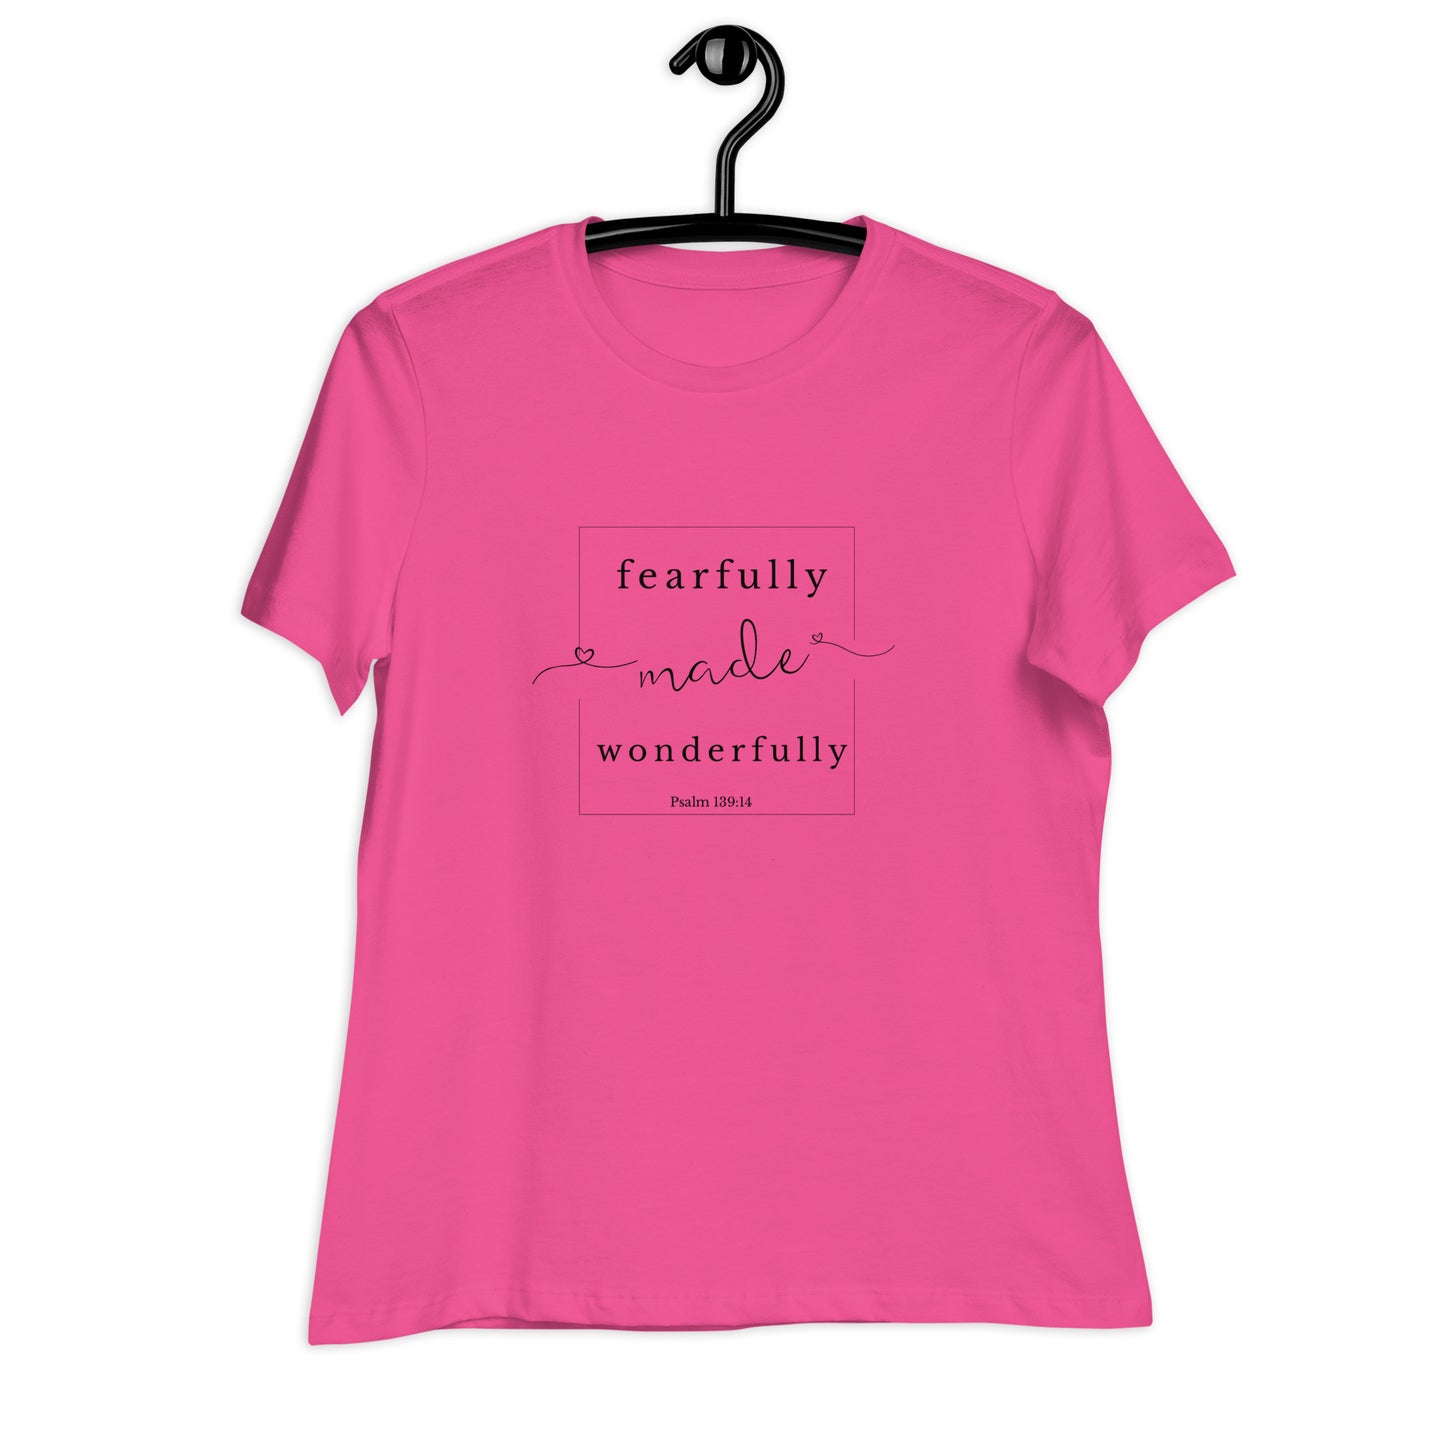 Psalm 139:14 T-Shirt - berry front on hanger